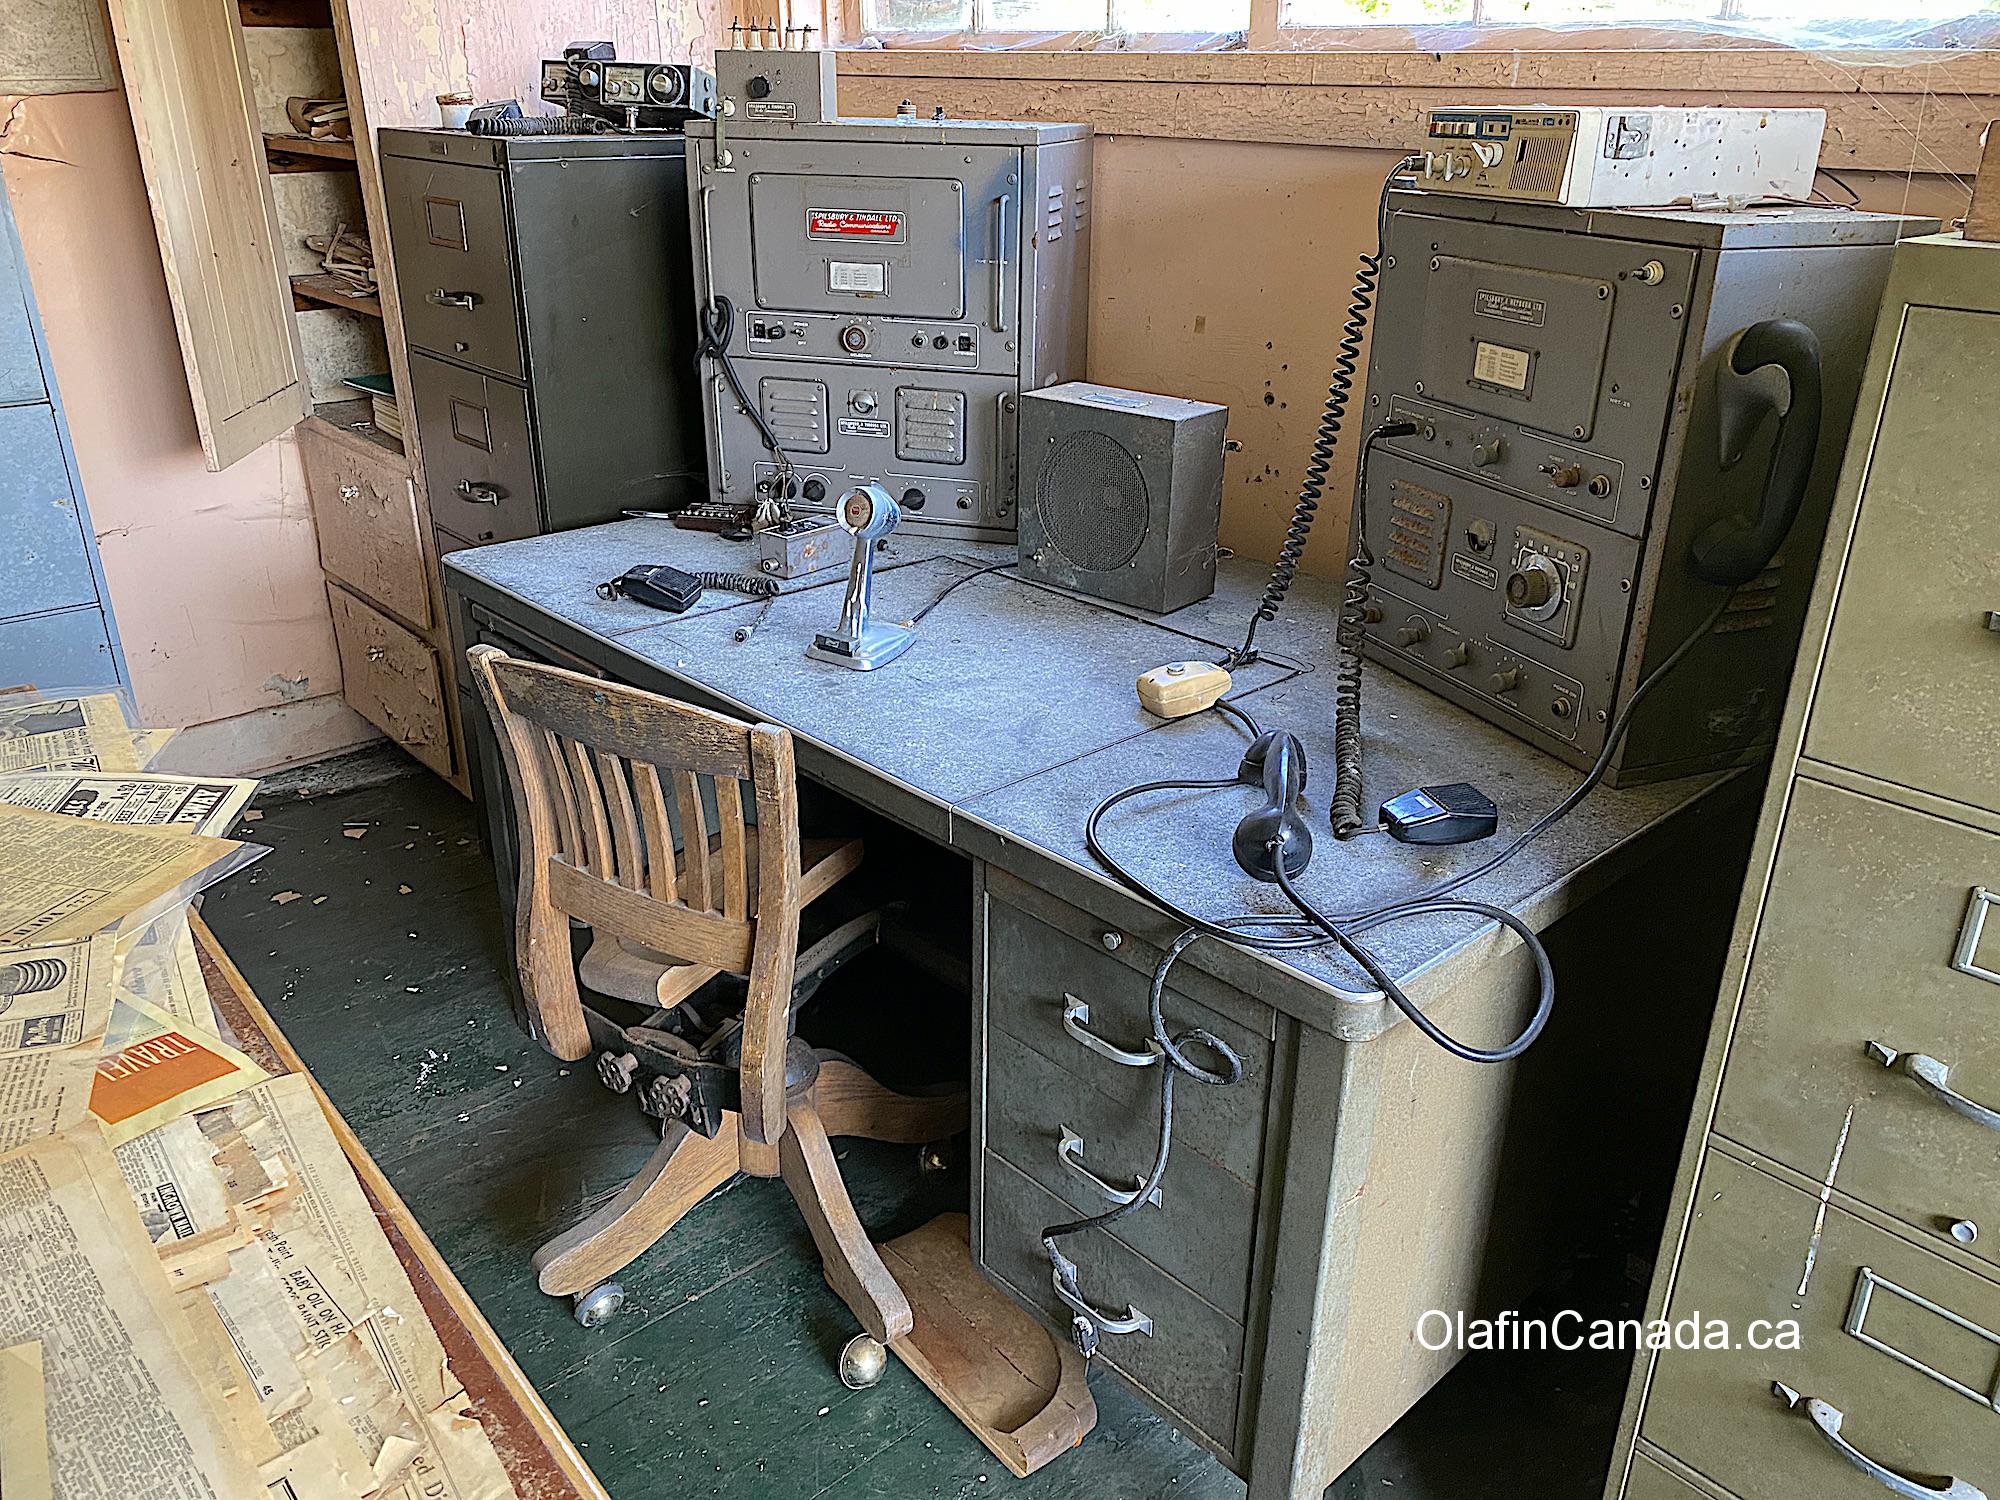 The operator station at the Tallheo Cannery in Bella Coola Old perforator full of cobwebs in the office #olafincanada #britishcolumbia #discoverbc #abandonedbc #tallheocannery #bellacoola